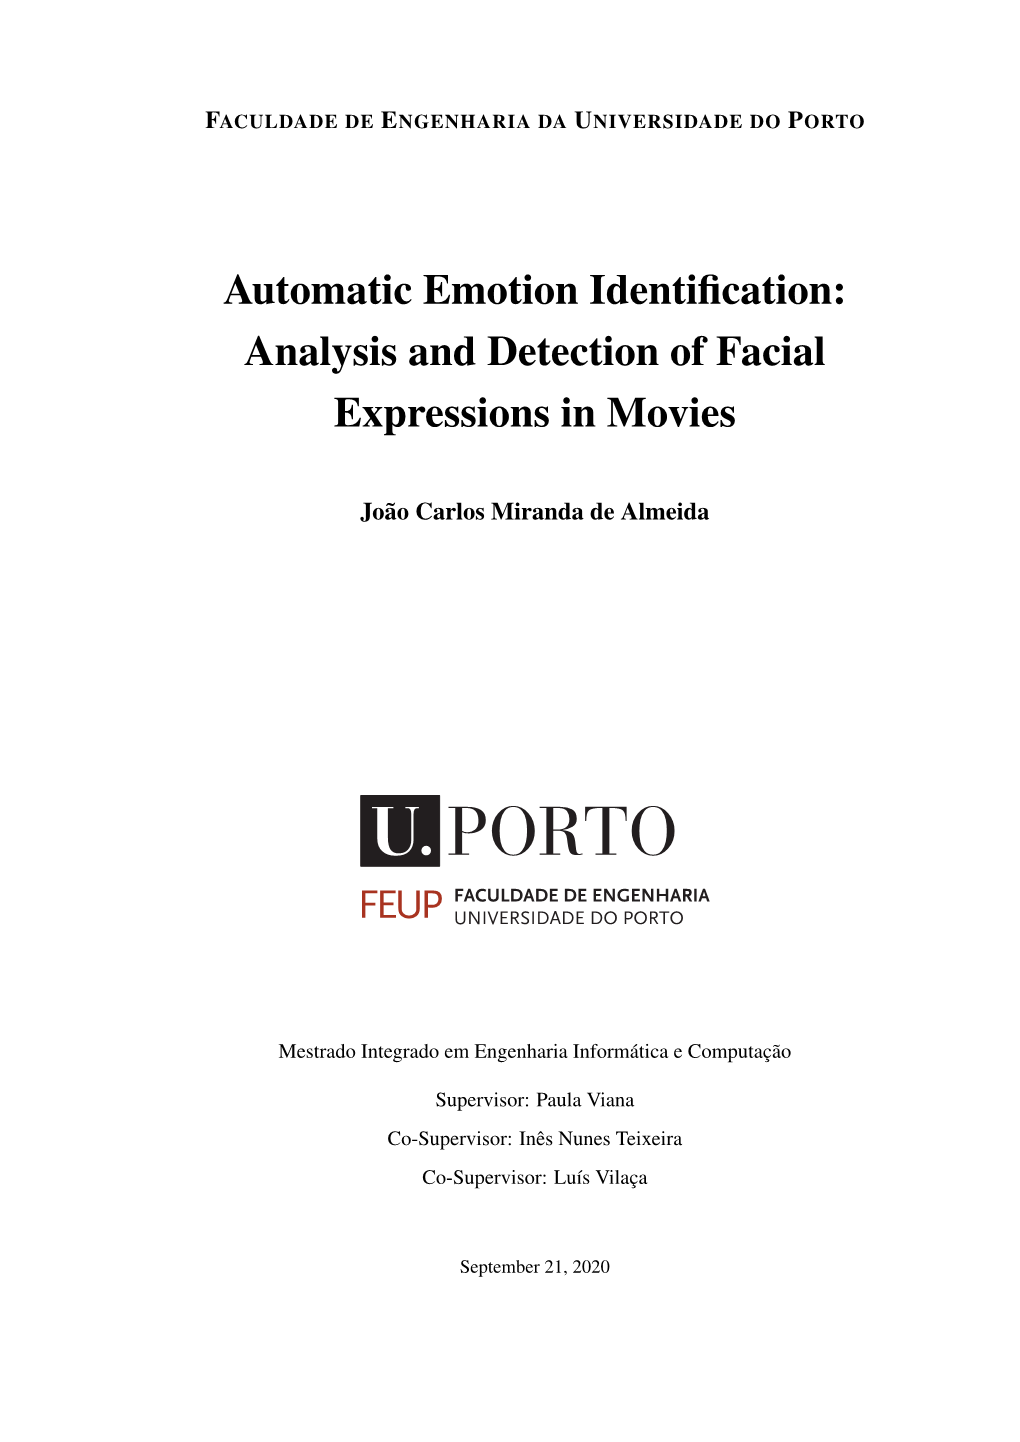 Automatic Emotion Identification: Analysis and Detection of Facial Expressions in Movies